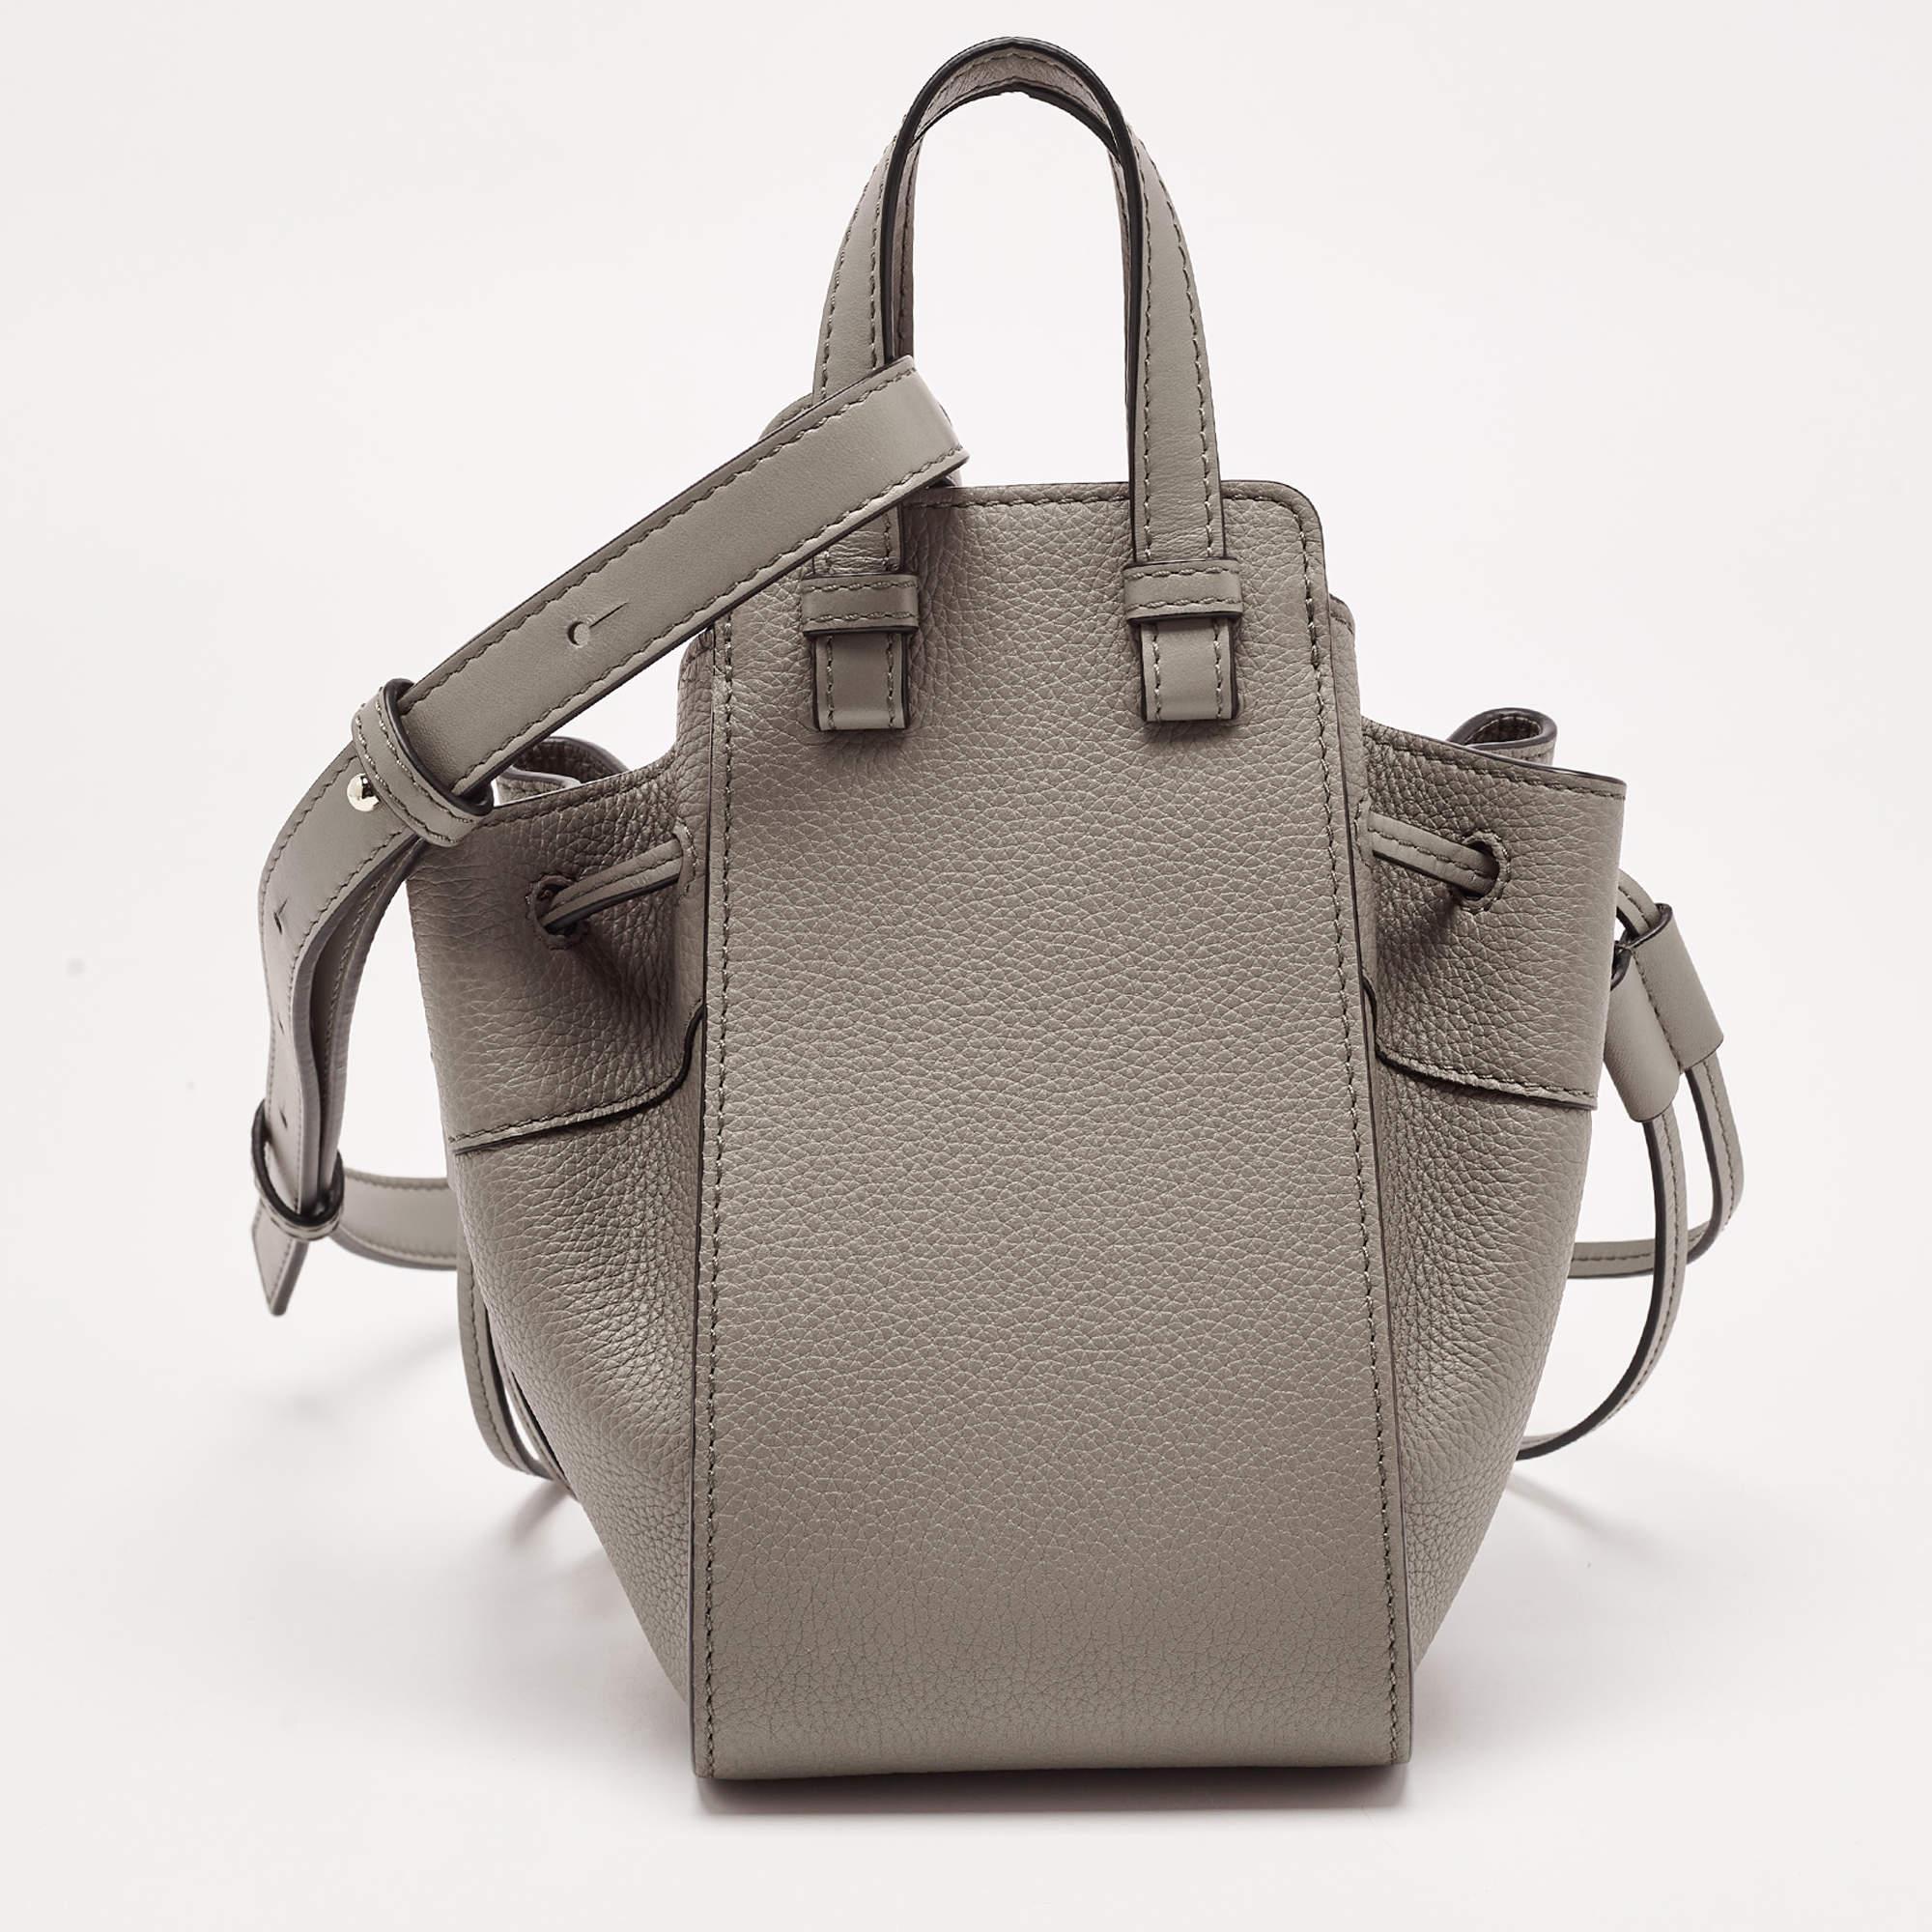 Loewe has been widely recognized for creating pieces that flaunt unique designs and quality craftsmanship. This mini Hammock bag is crafted using leather and has the brand logo embossed on the front. The drawstring closure opens to a canvas-lined